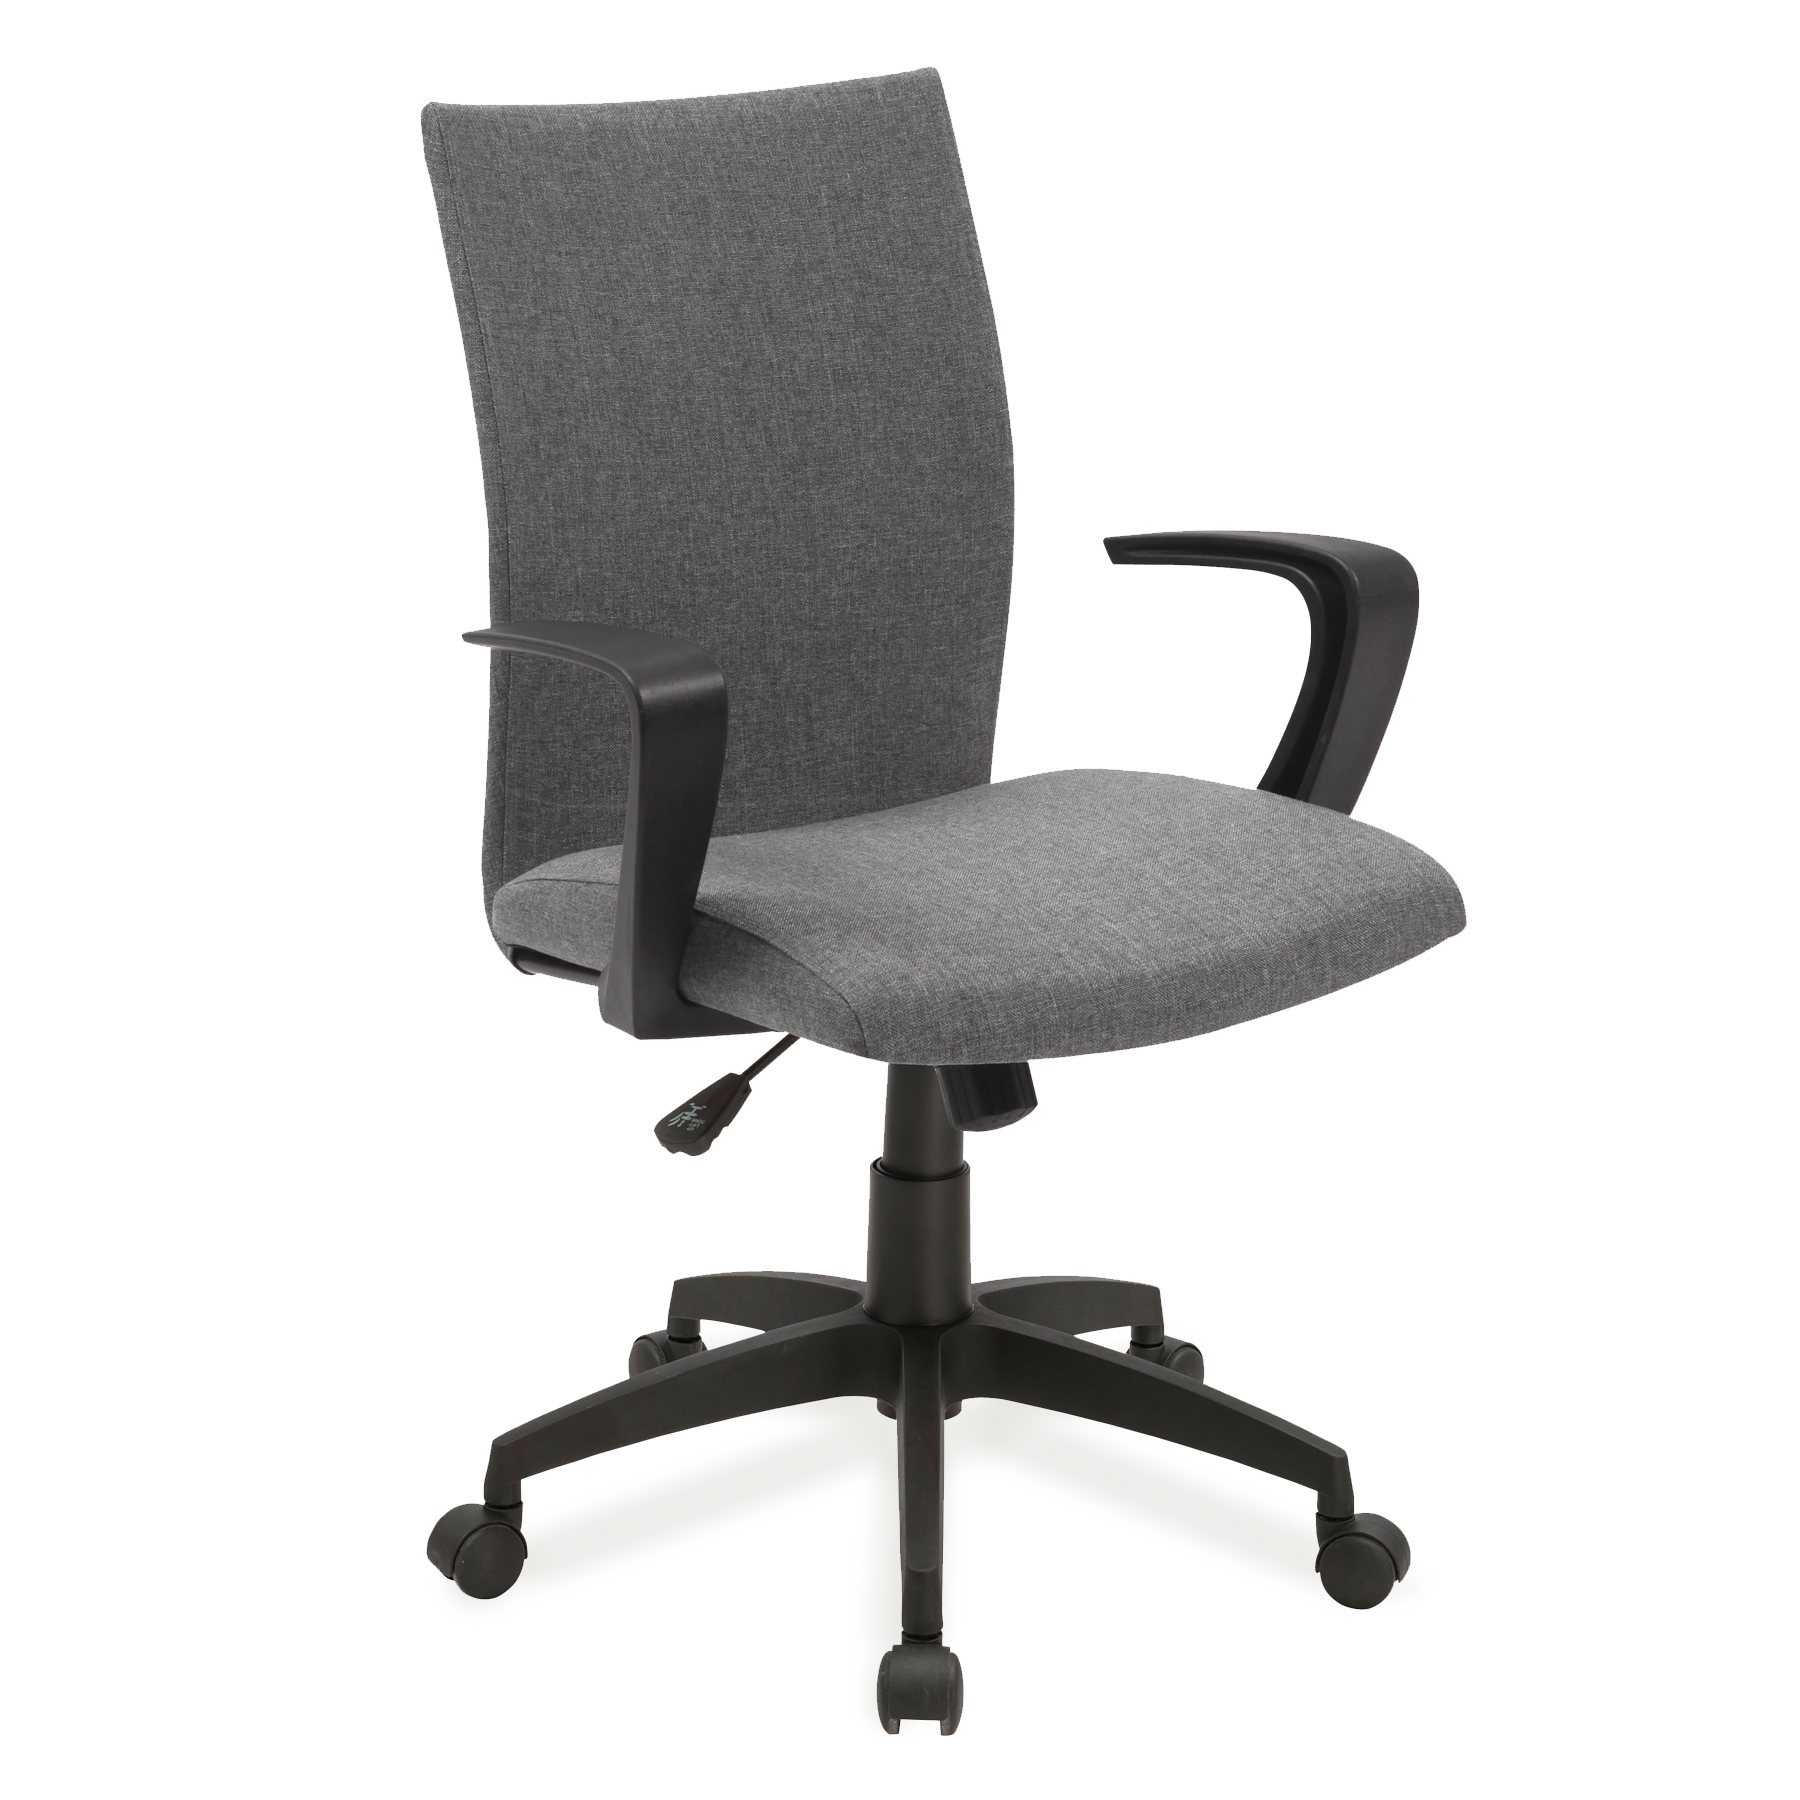 Leick Grey Linen Apostrophe Office Chair with Black Caster Base